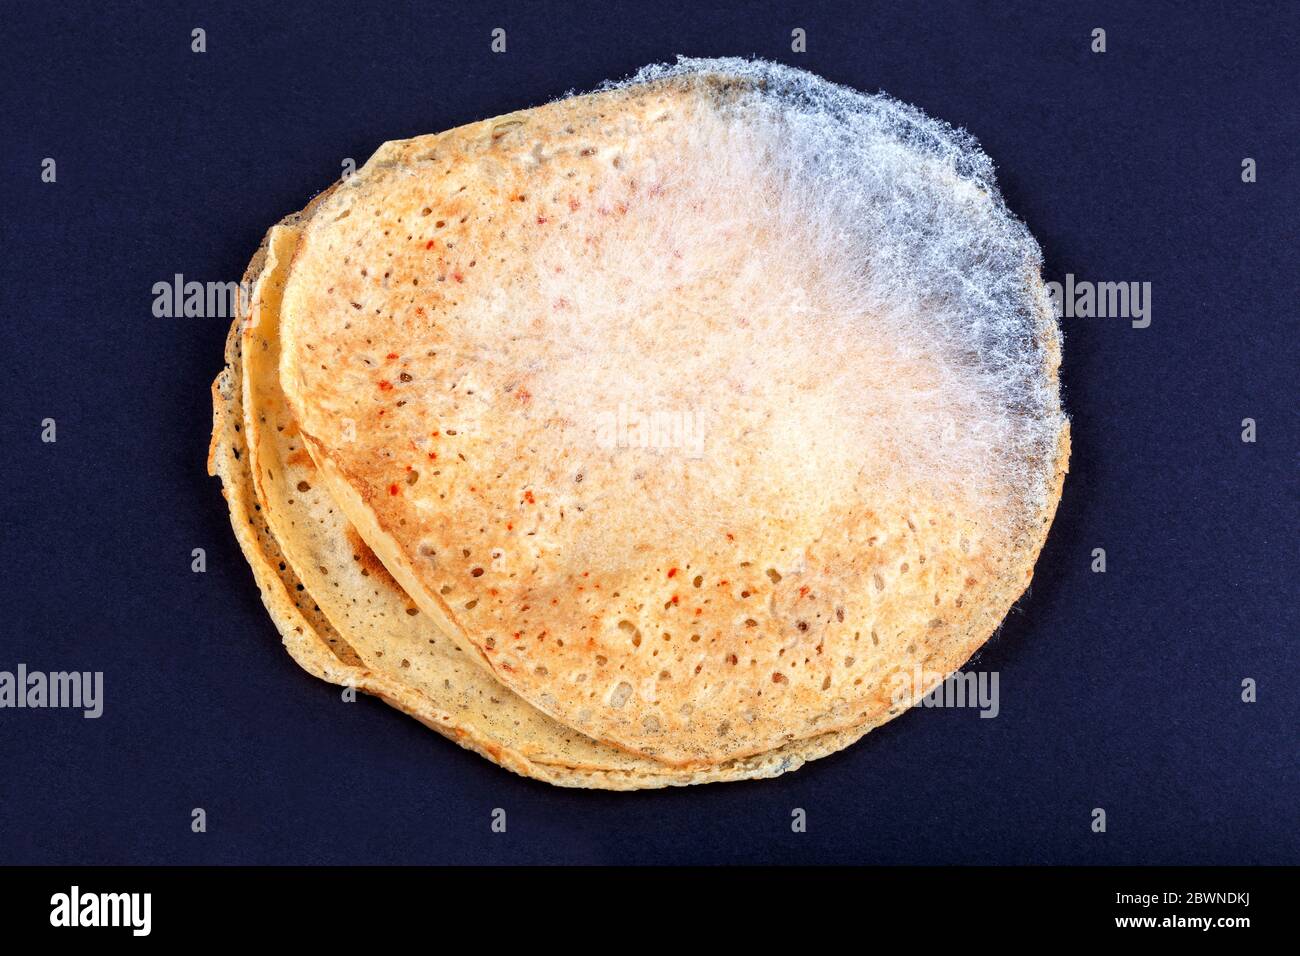 Spoiled moldy pancake, food gone bad concept. Fungal mold spores growing on round pastry surface on dark background. Edibles, products expiration date Stock Photo